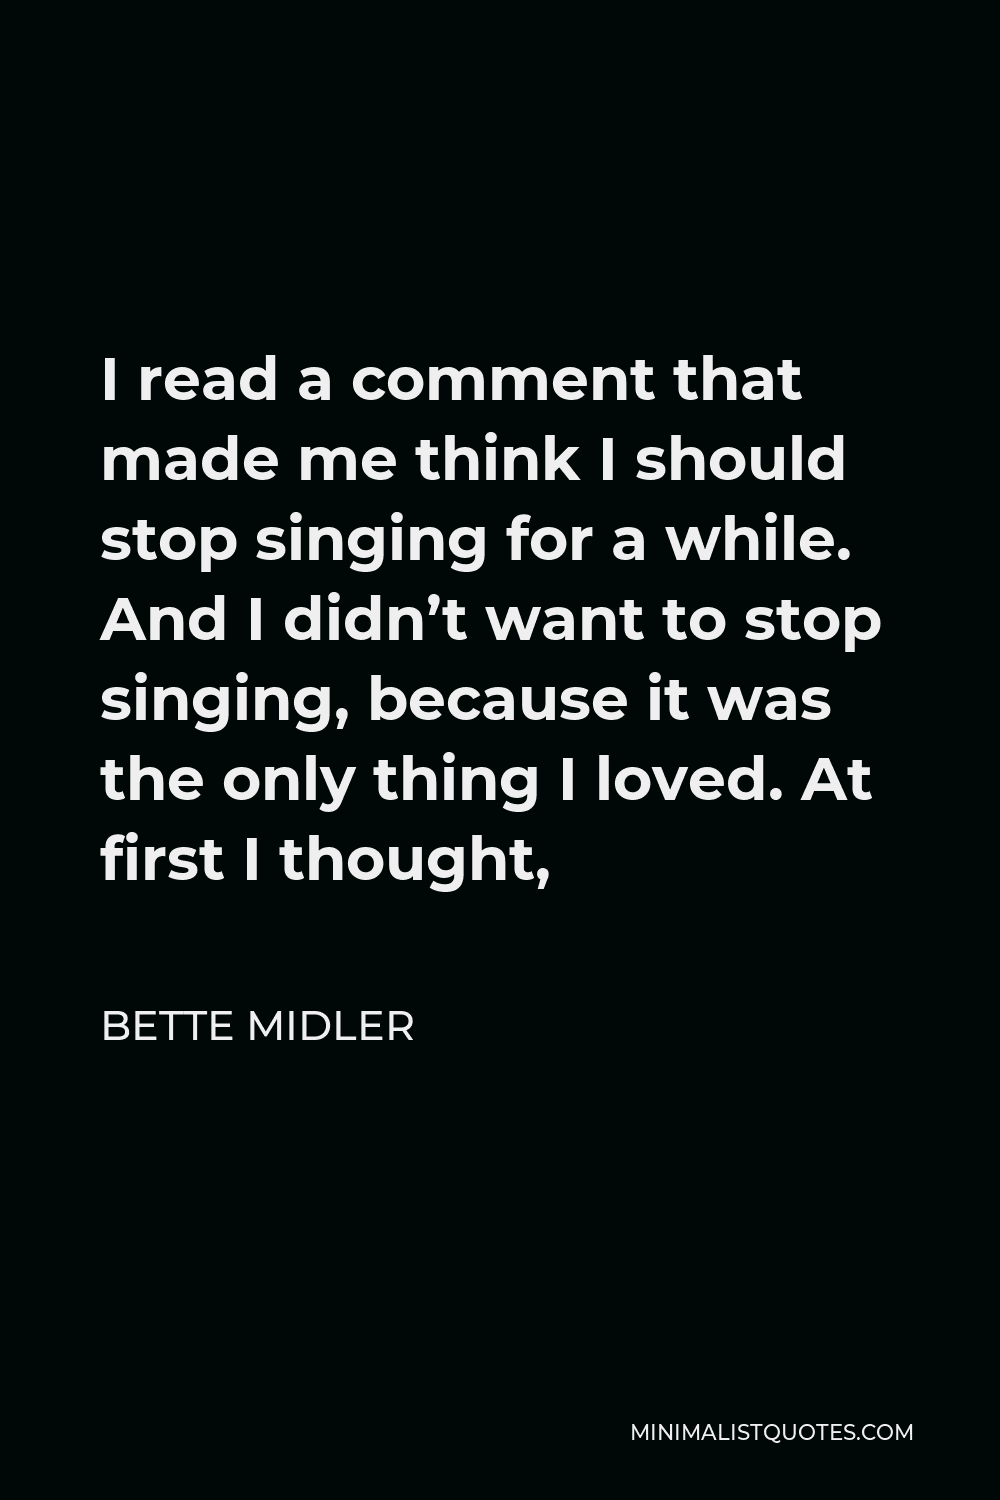 Bette Midler Quote - I read a comment that made me think I should stop singing for a while. And I didn’t want to stop singing, because it was the only thing I loved. At first I thought,